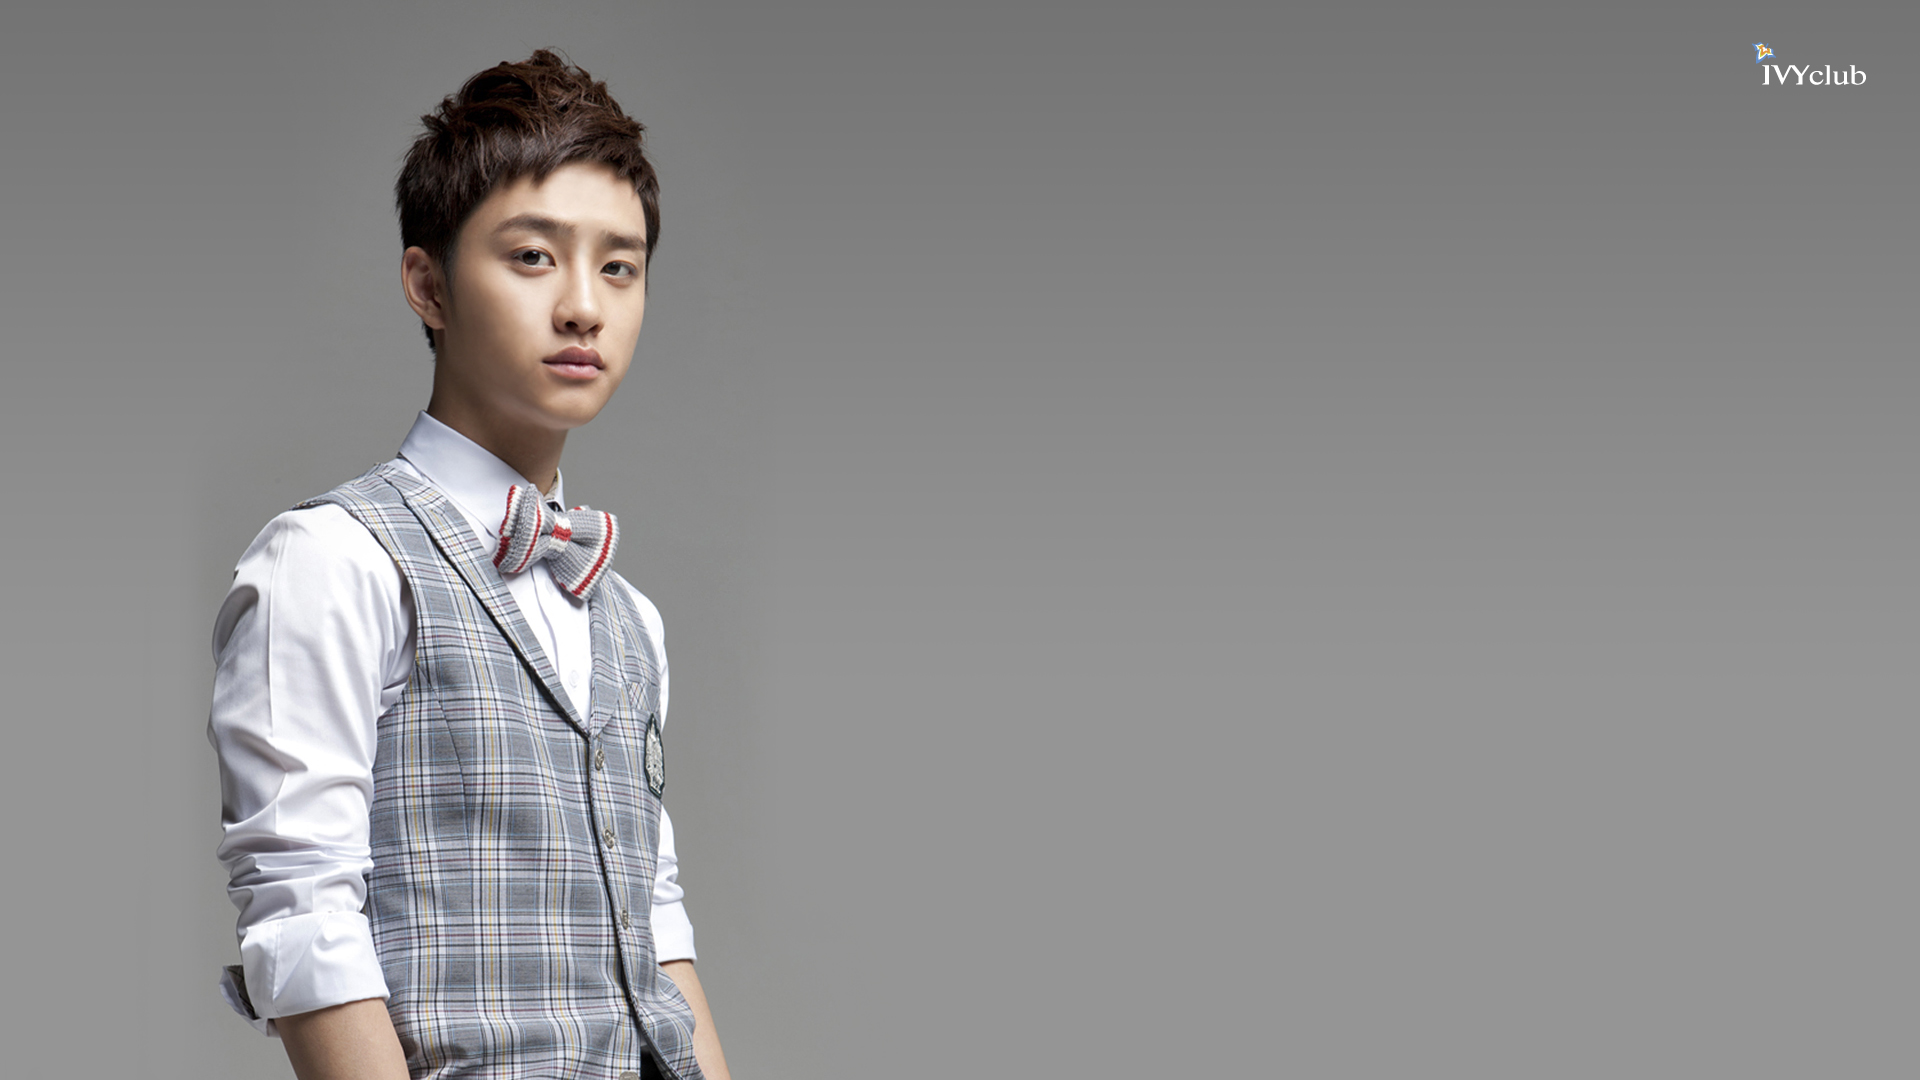 Exo Wallpapers, Pictures, Images